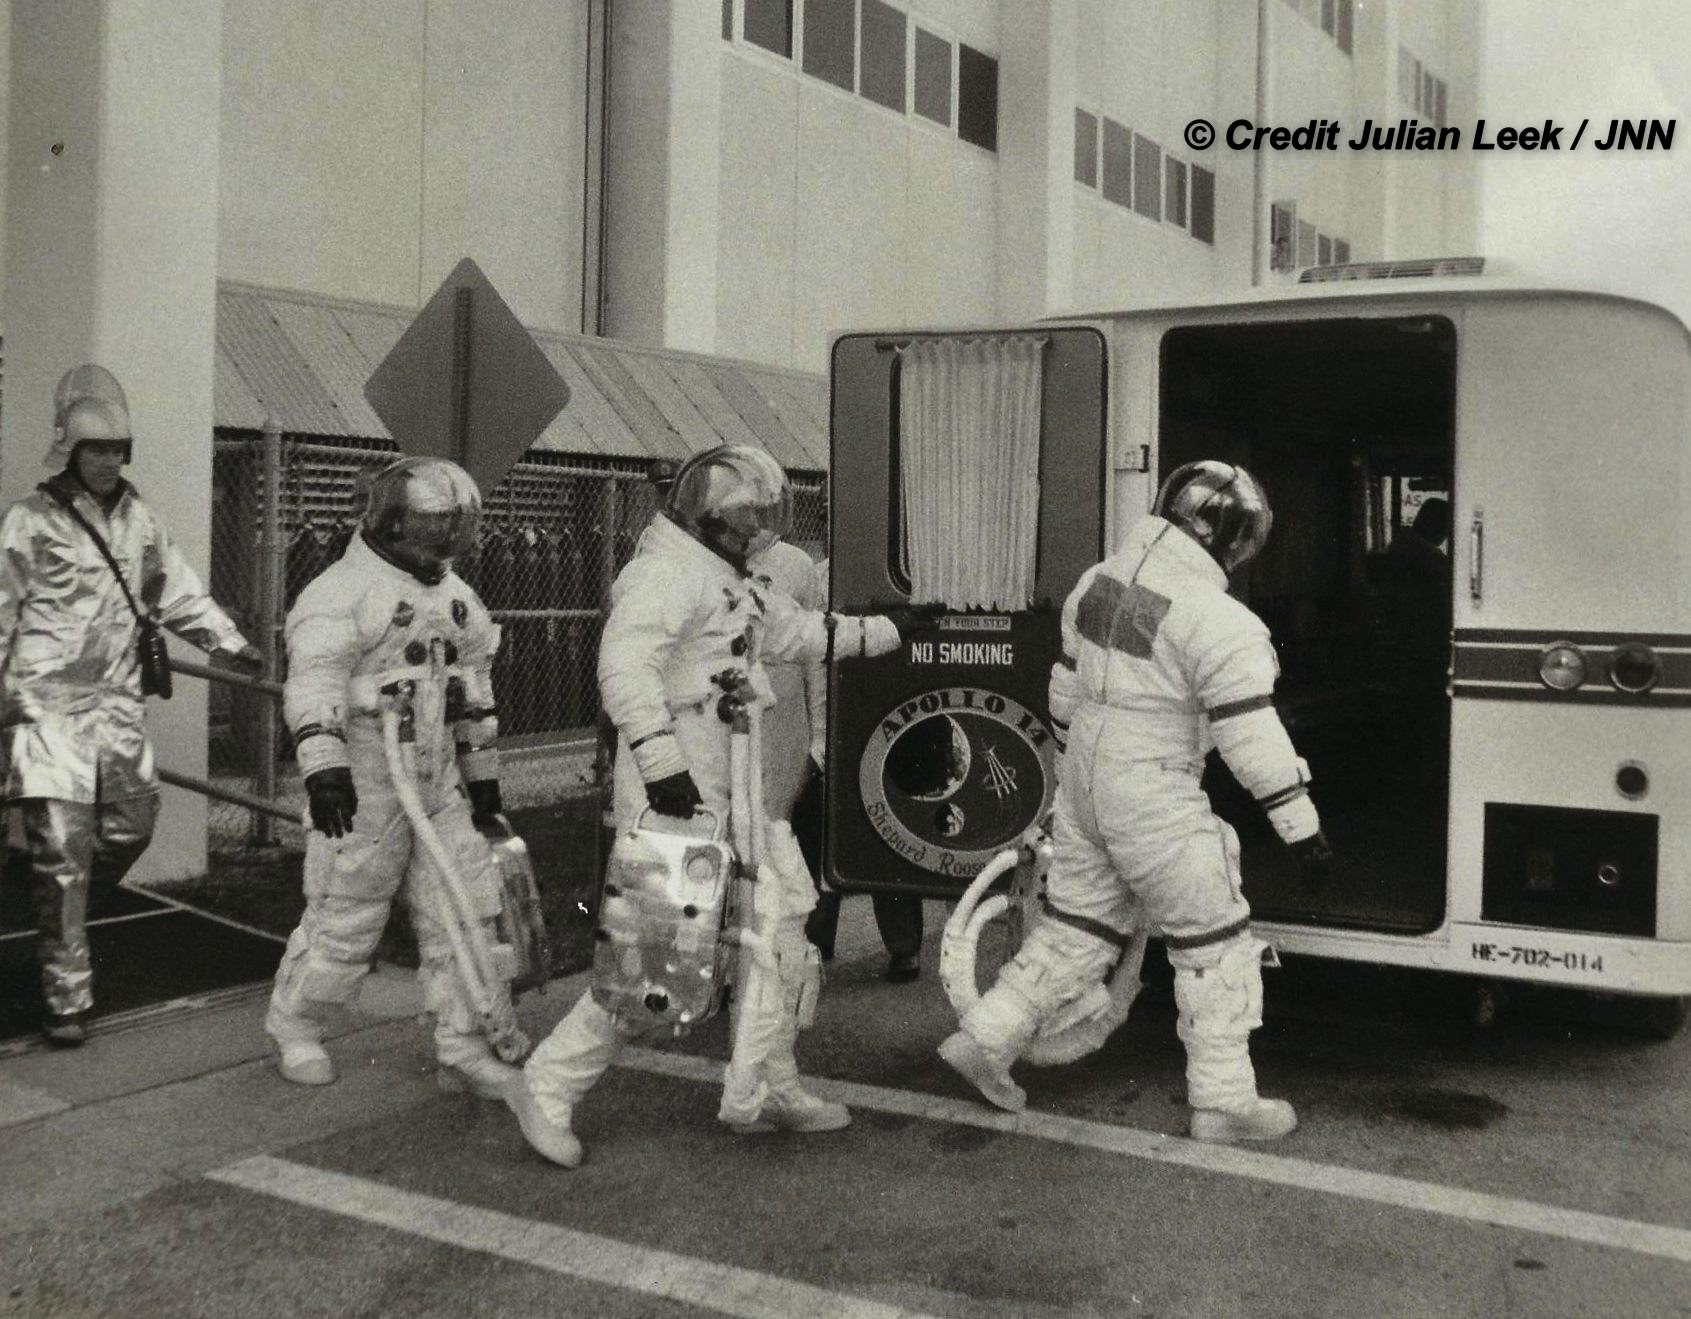 Apollo 14 astronaut crew, including Moonwalkers Alan B. Shepard Jr., mission commander (first) and Edgar D. Mitchell, lunar module pilot (last), and Stuart A. Roosa, command module pilot (middle) walk out to the astrovan bringing them to the launch pad at NASA’s Kennedy Space Center.    Credit: Julian Leek 